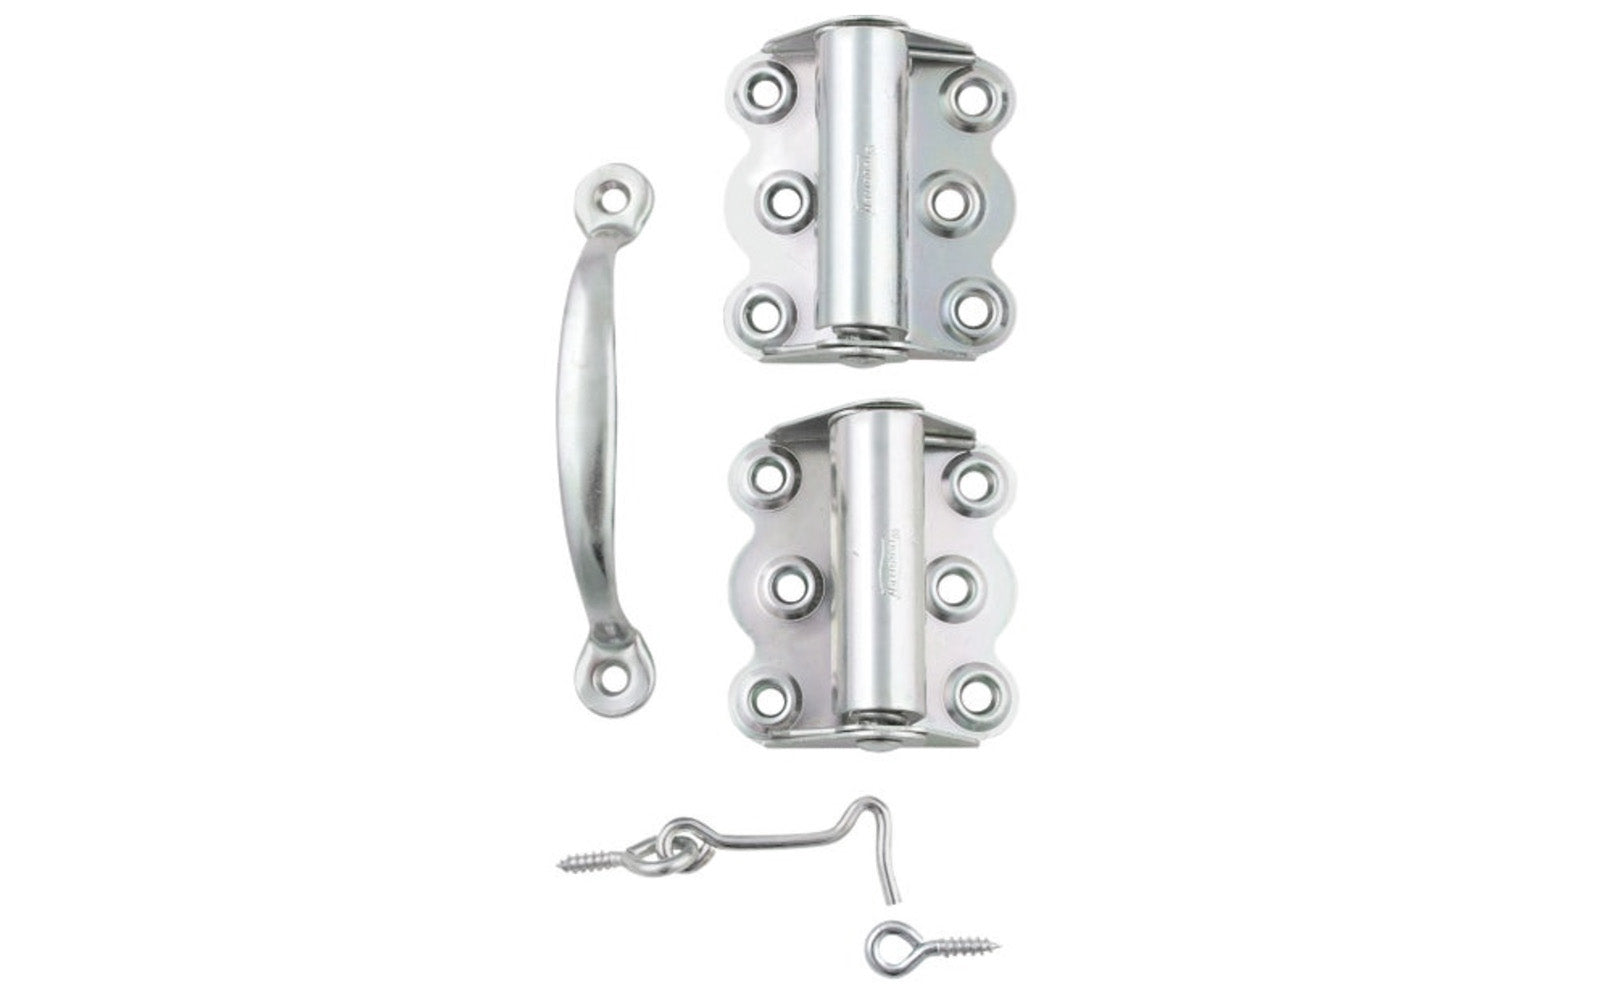 Zinc Plated Steel Screen / Storm Door Set is designed for wood screen & storm doors. Contains a pair of zinc plated 2-3/4